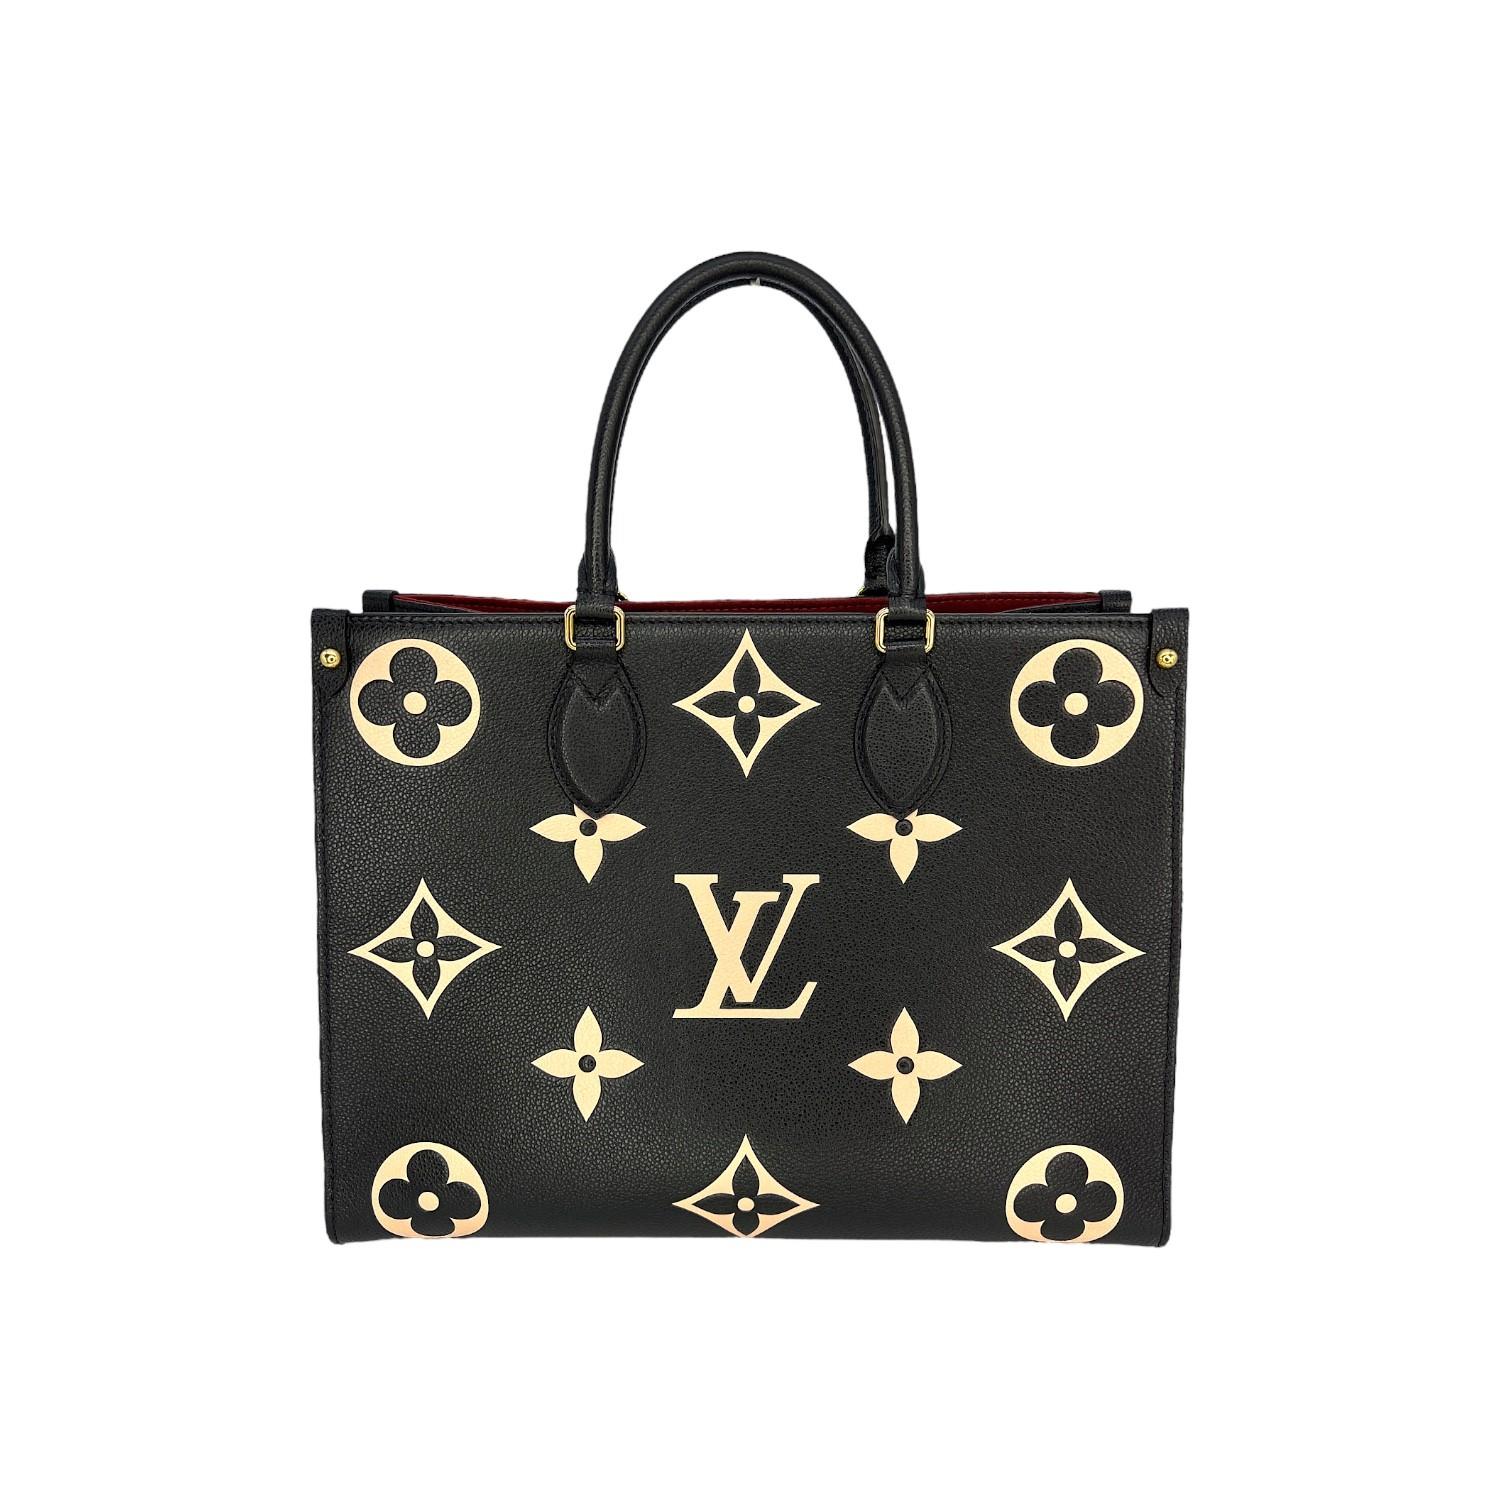 This Louis Vuitton OnTheGo MM was made in France and it is finely crafted of the Louis Vuitton Giant Monogram Empreinte leather exterior with gold-tone hardware features. It has dual rolled leather top handles and it also has dual flat leather